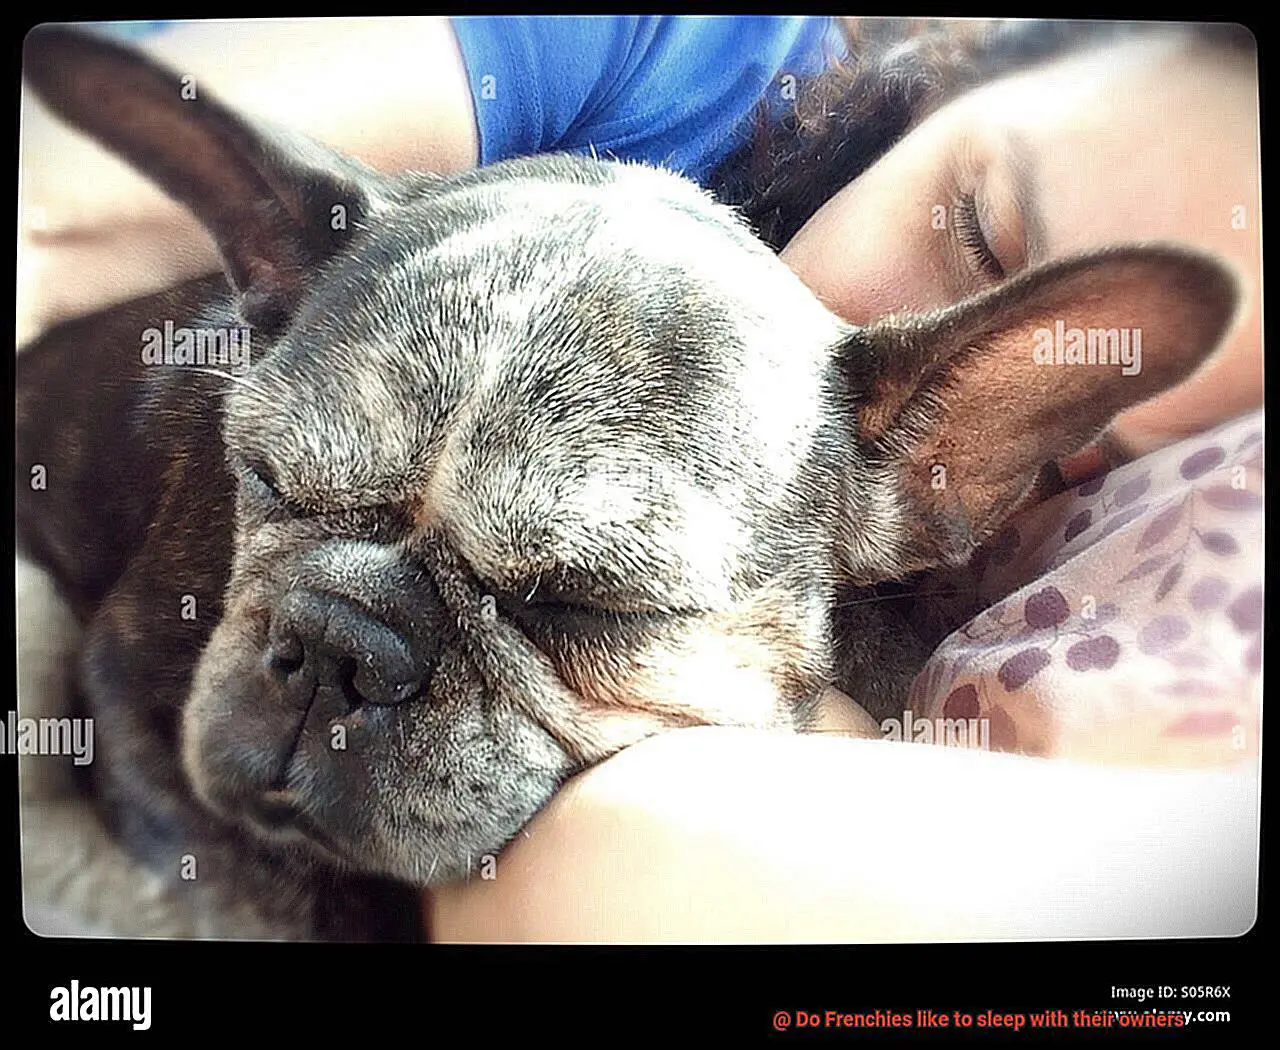 Do Frenchies like to sleep with their owners-6